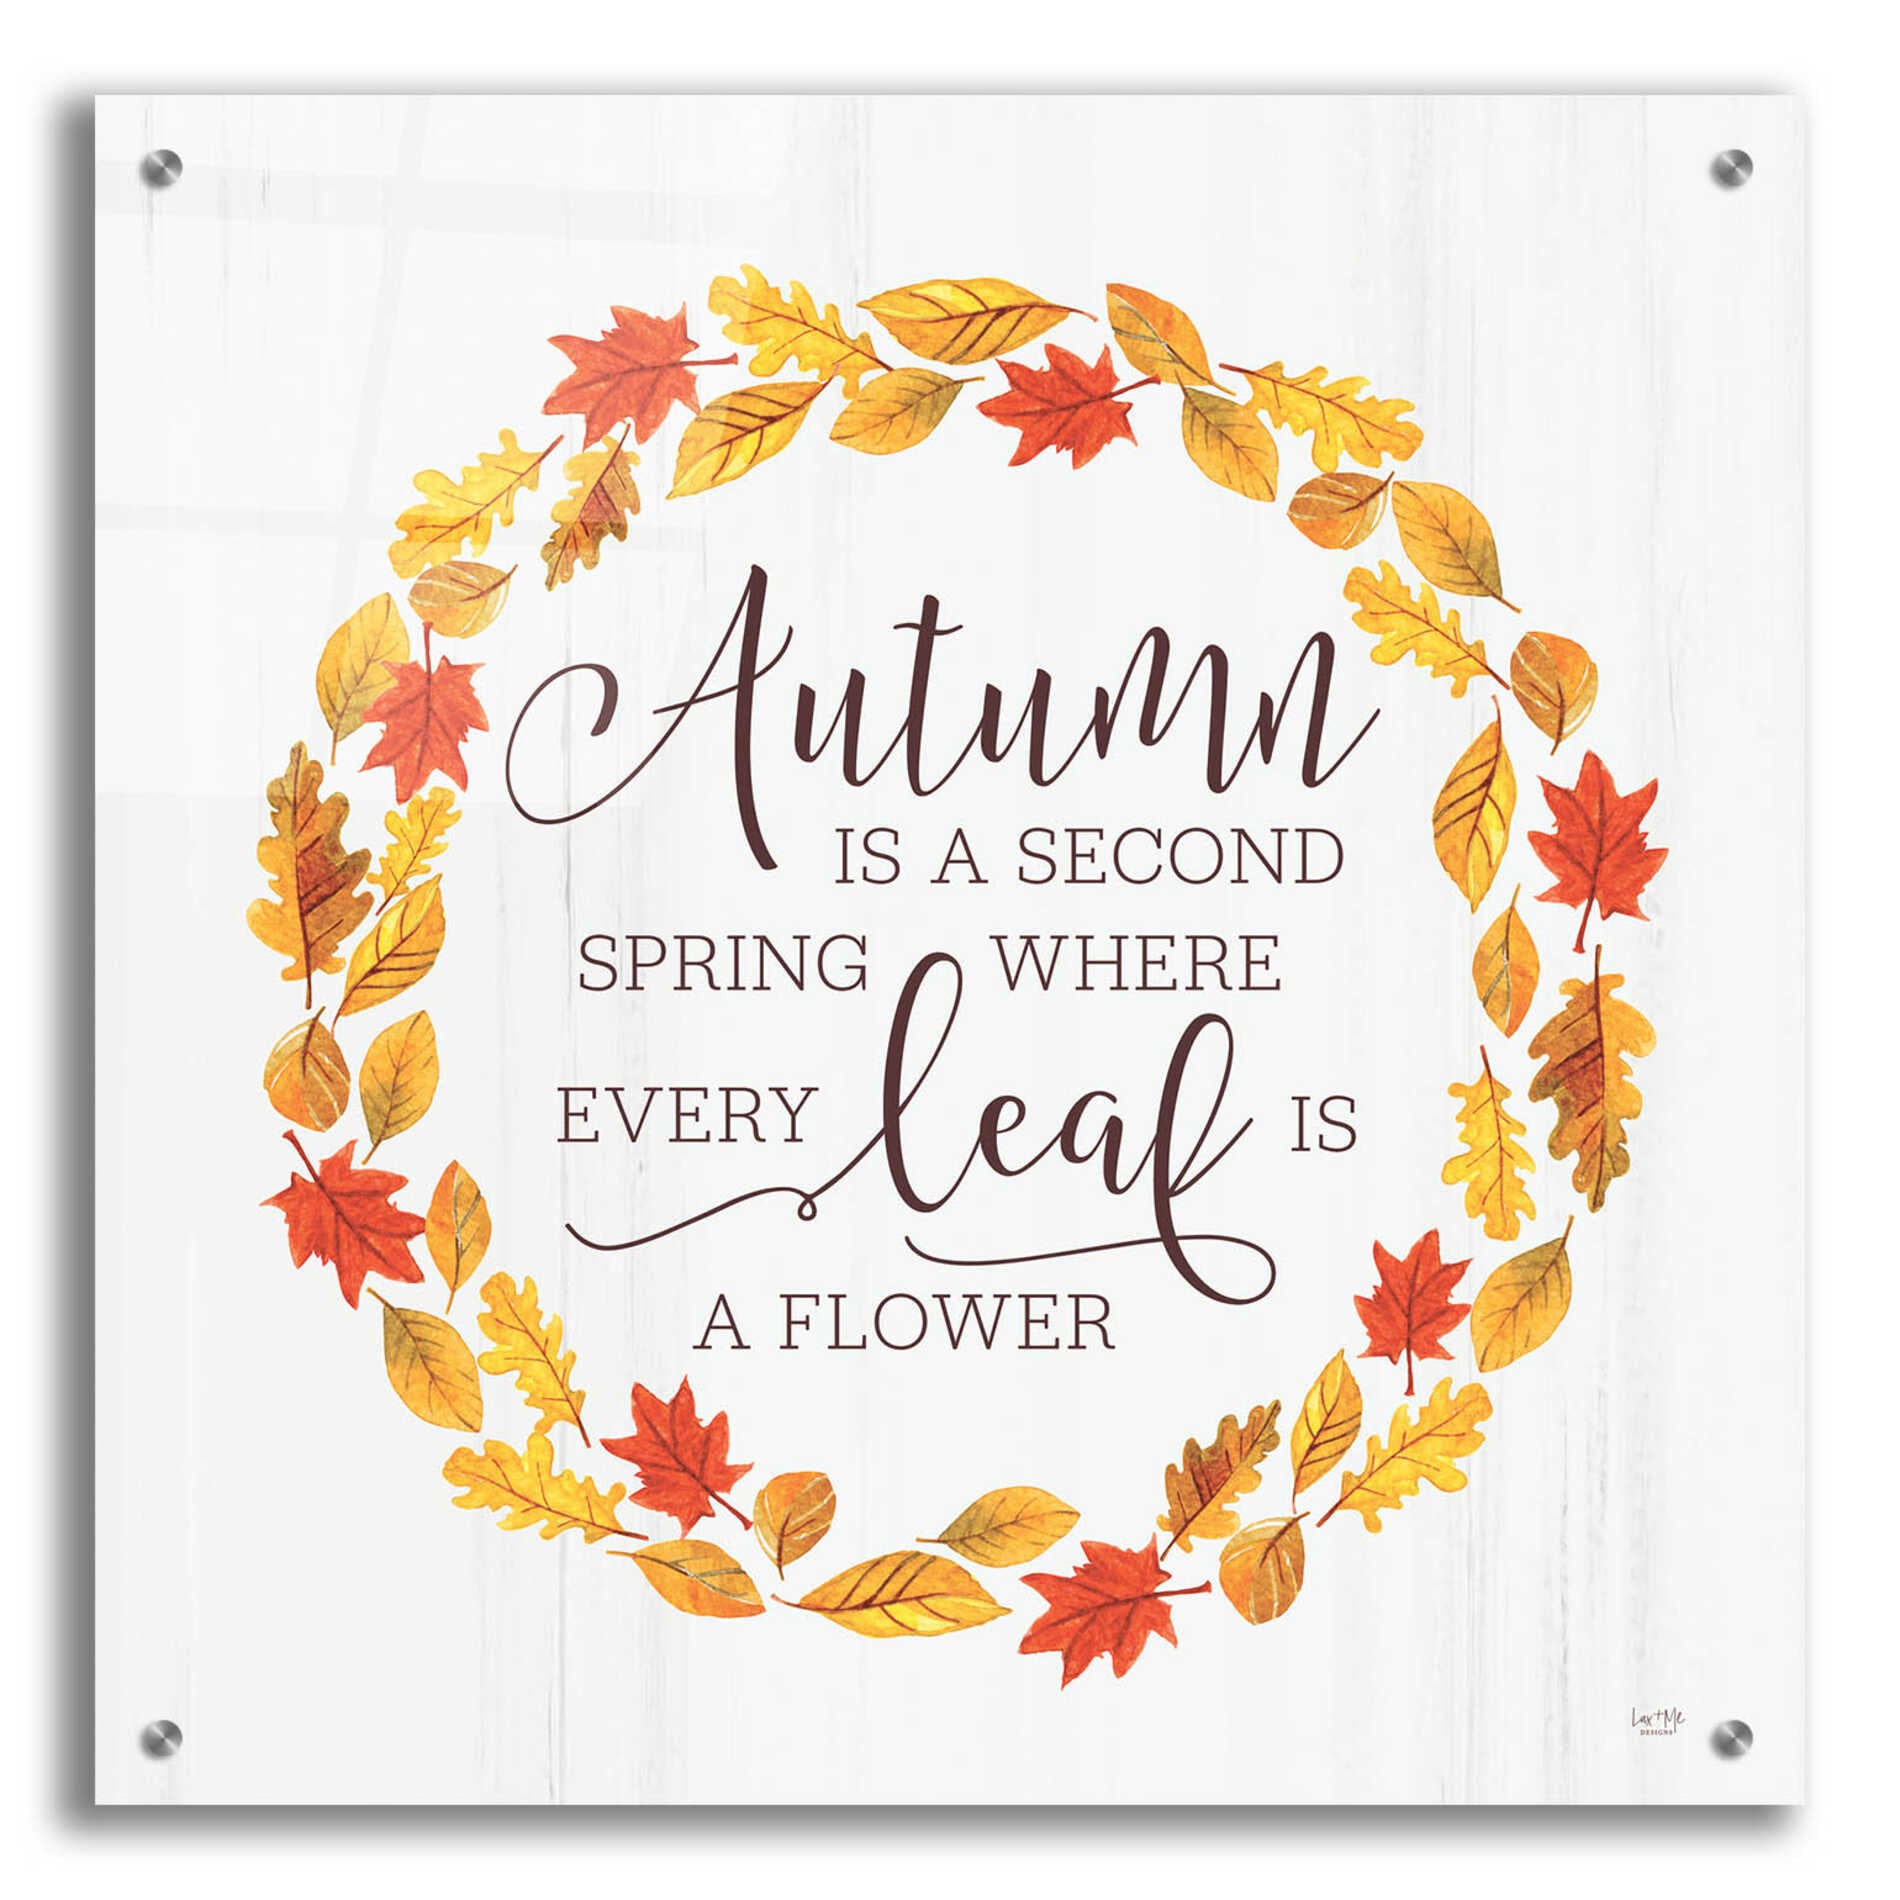 Epic Art 'Autumn is a Second Spring' by Lux + Me Designs, Acrylic Glass Wall Art,24x24